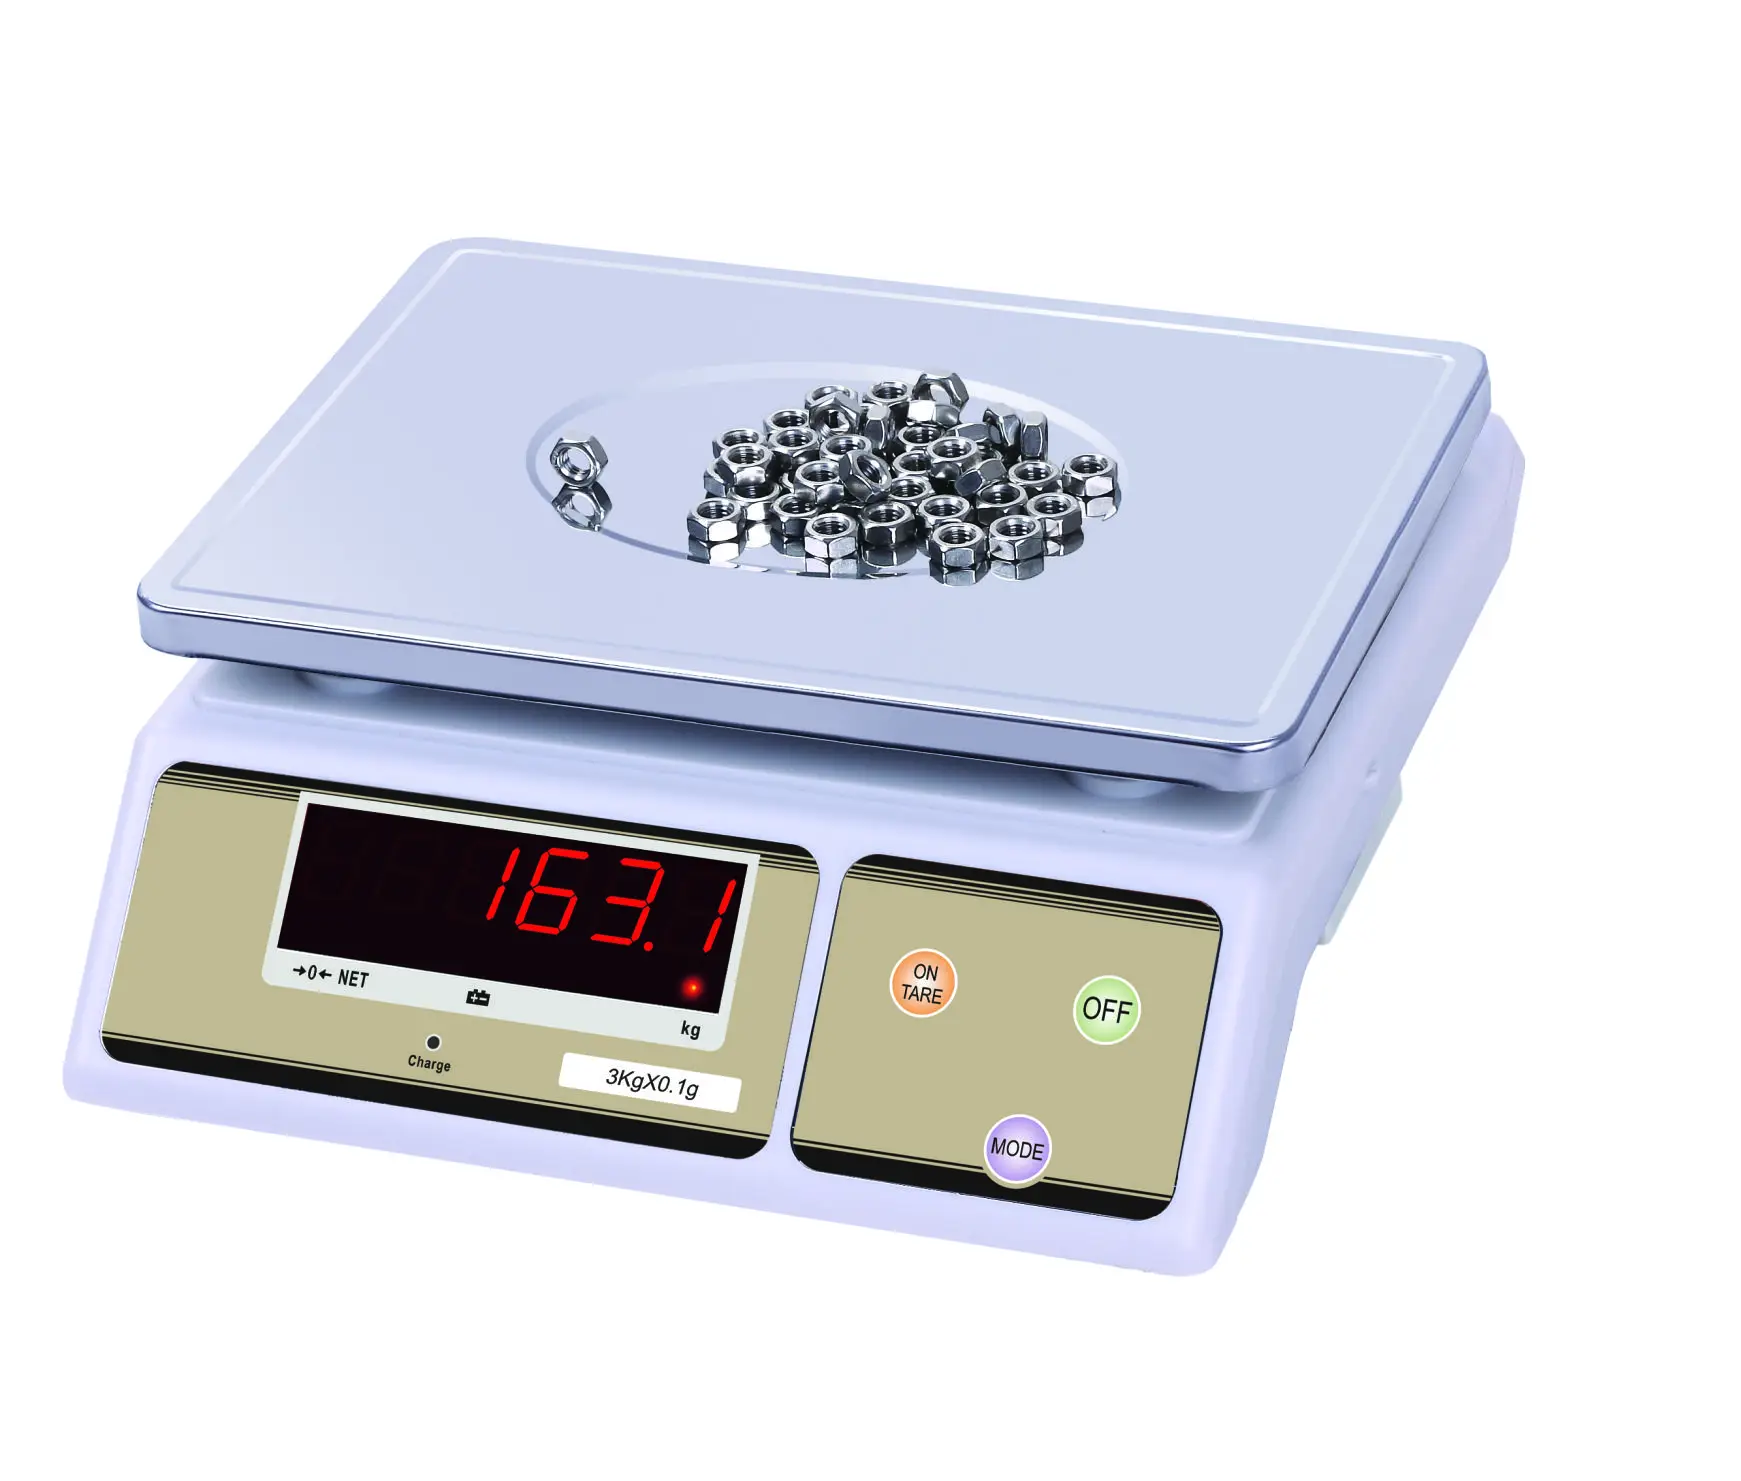 Digital Weighing  Scale kitchen scale3Kg 0.1g 6Kg0.2g 15Kg0.5g 30kg1gFood Scales Digital Weight Gram and Oz Scale with LCD/ Tare protable 150kg digital electronic fitness bathroom body fat weight scale health weighing luggage scale